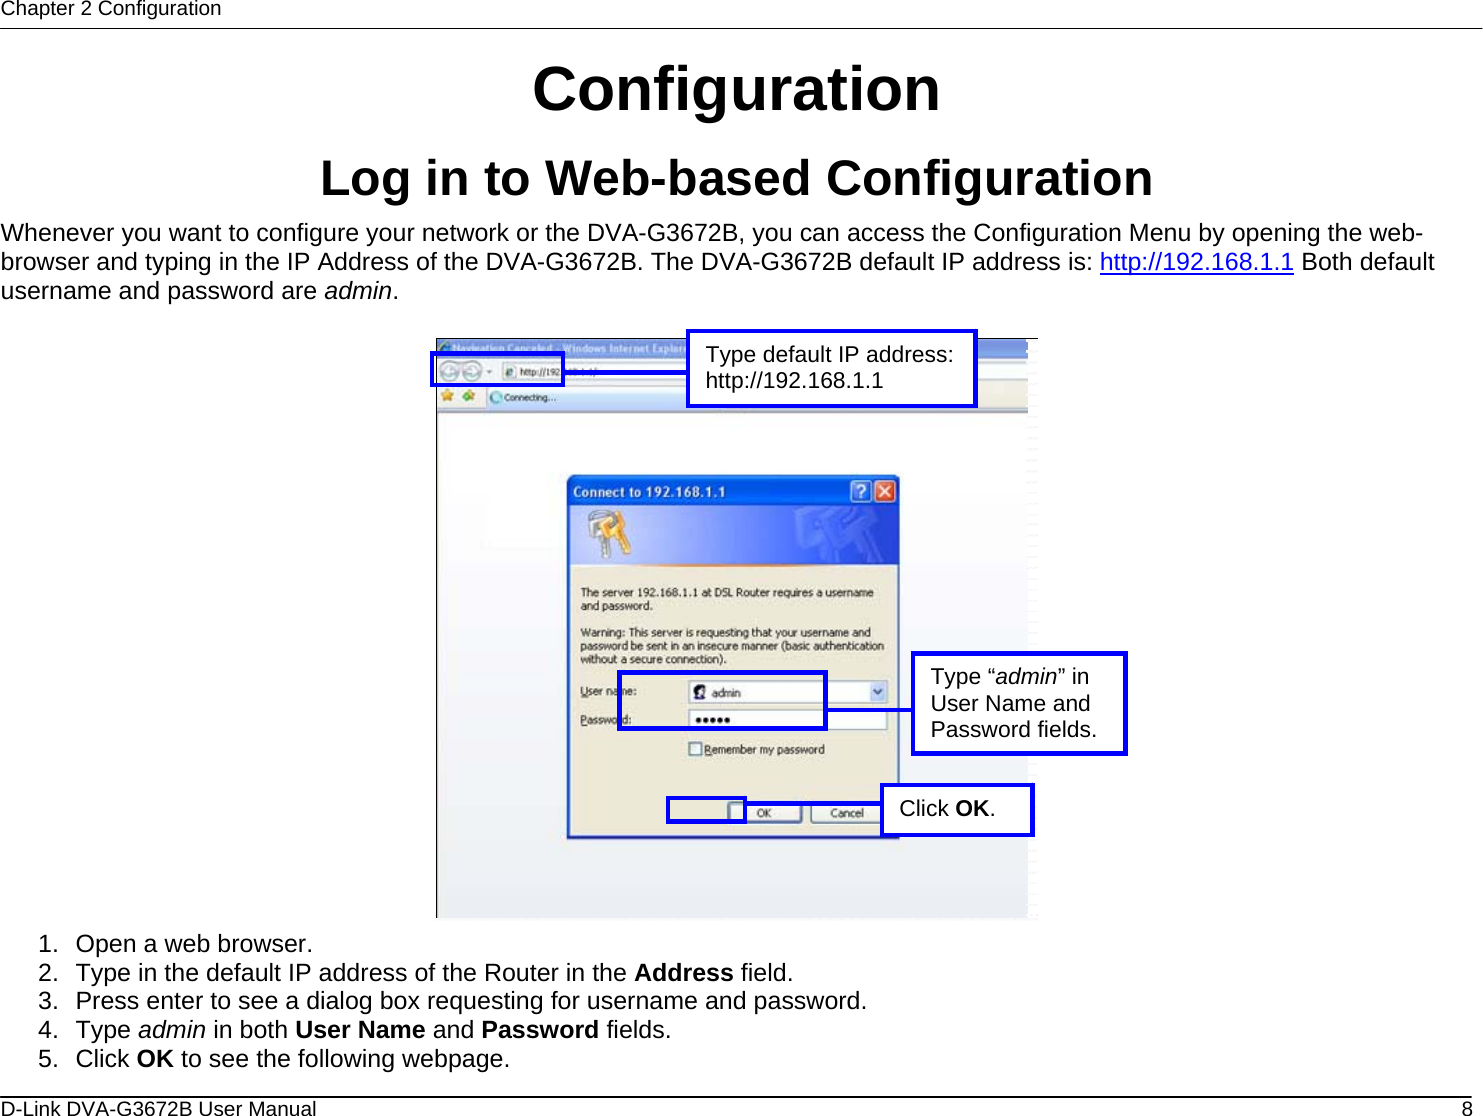 Chapter 2 Configuration Configuration Log in to Web-based Configuration Whenever you want to configure your network or the DVA-G3672B, you can access the Configuration Menu by opening the web-browser and typing in the IP Address of the DVA-G3672B. The DVA-G3672B default IP address is: http://192.168.1.1 Both default username and password are admin.   Type “admin” in User Name and Password fields.Type default IP address:http://192.168.1.1 Click OK. 1.  Open a web browser. 2.  Type in the default IP address of the Router in the Address field. 3.  Press enter to see a dialog box requesting for username and password. 4. Type admin in both User Name and Password fields. 5. Click OK to see the following webpage. D-Link DVA-G3672B User Manual  8